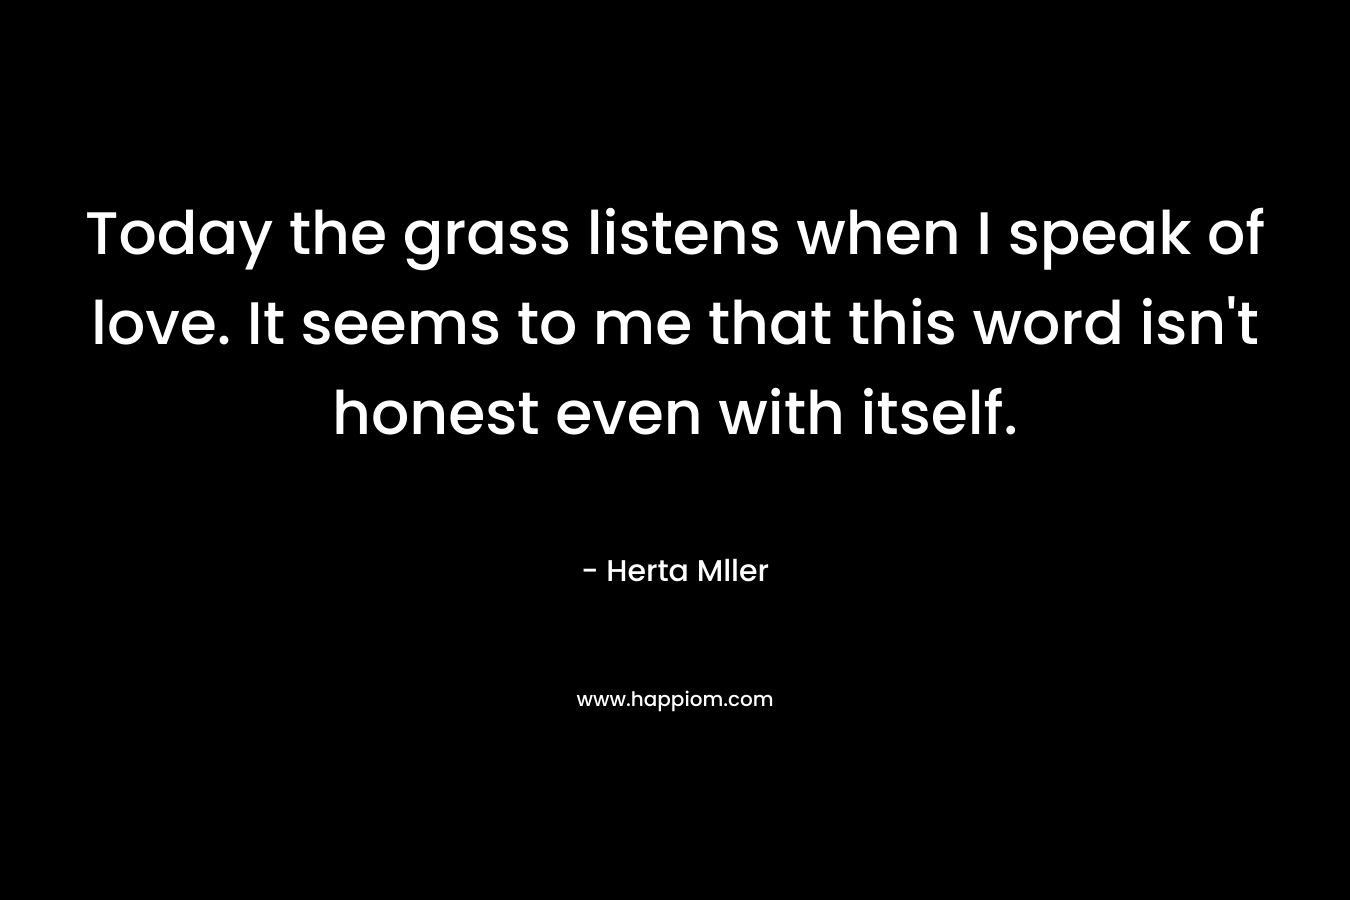 Today the grass listens when I speak of love. It seems to me that this word isn't honest even with itself.